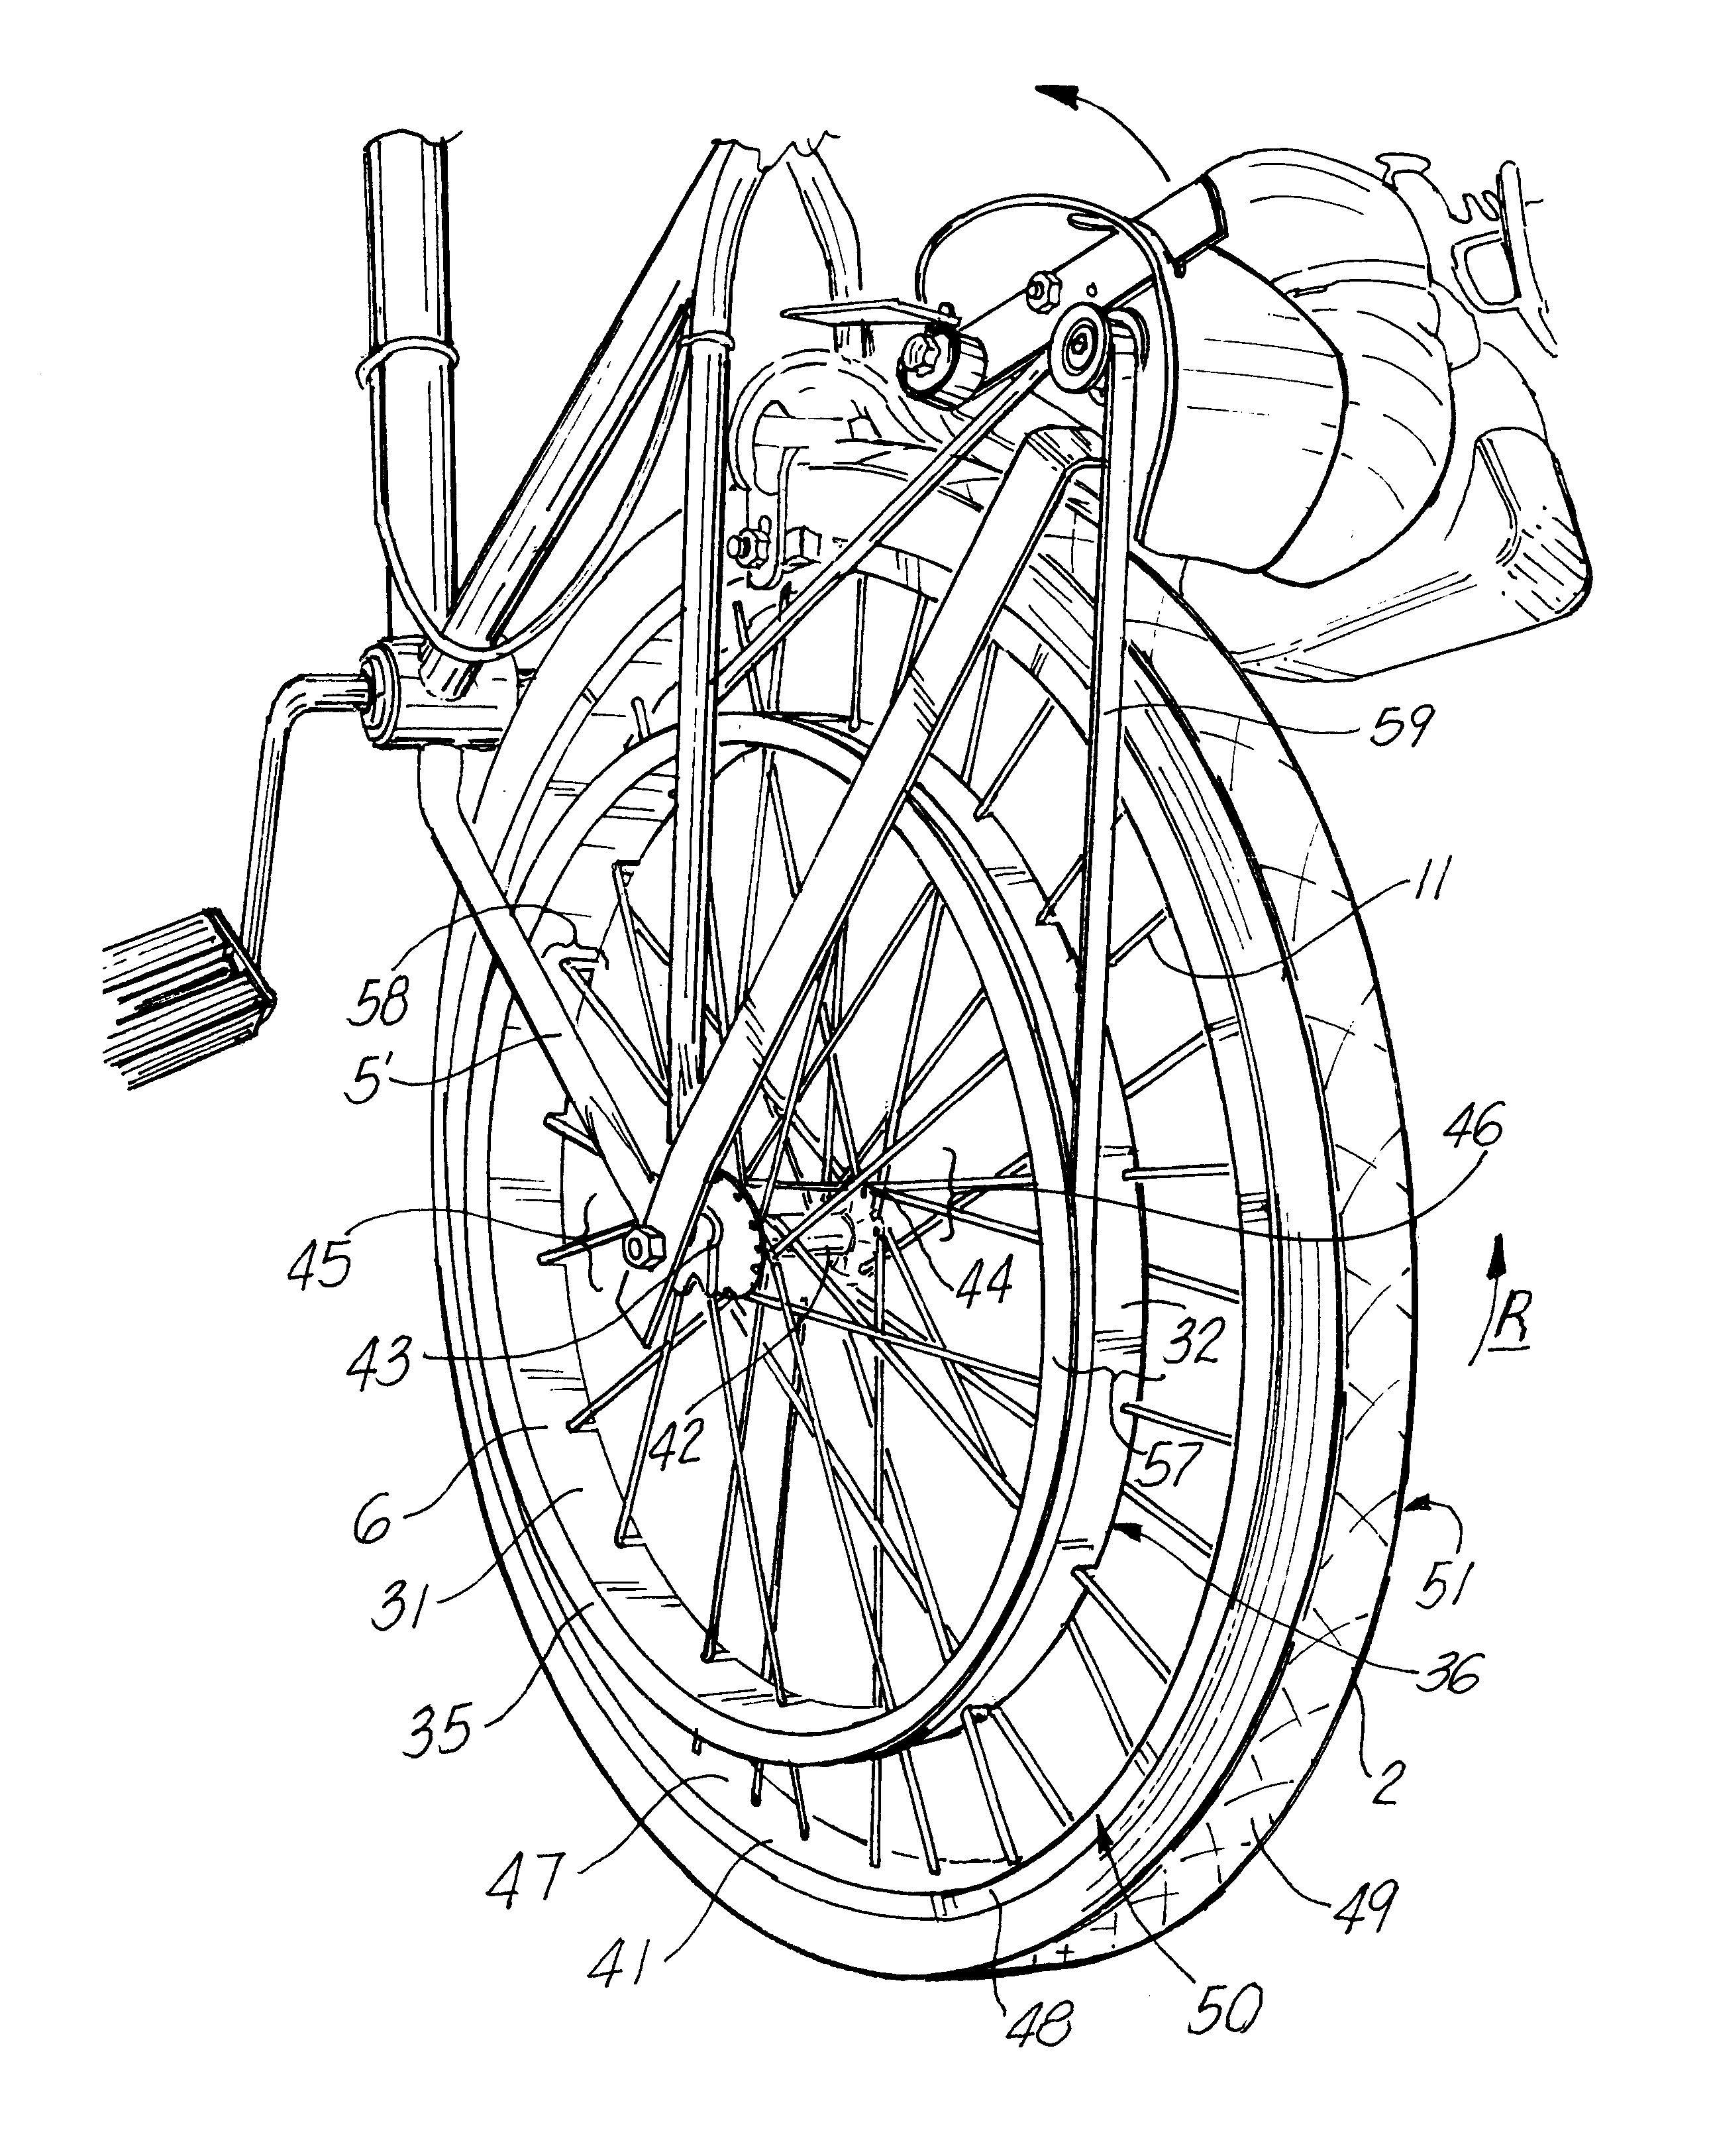 Spoke mounted drive hub for a cycle and system for propulsion therefore